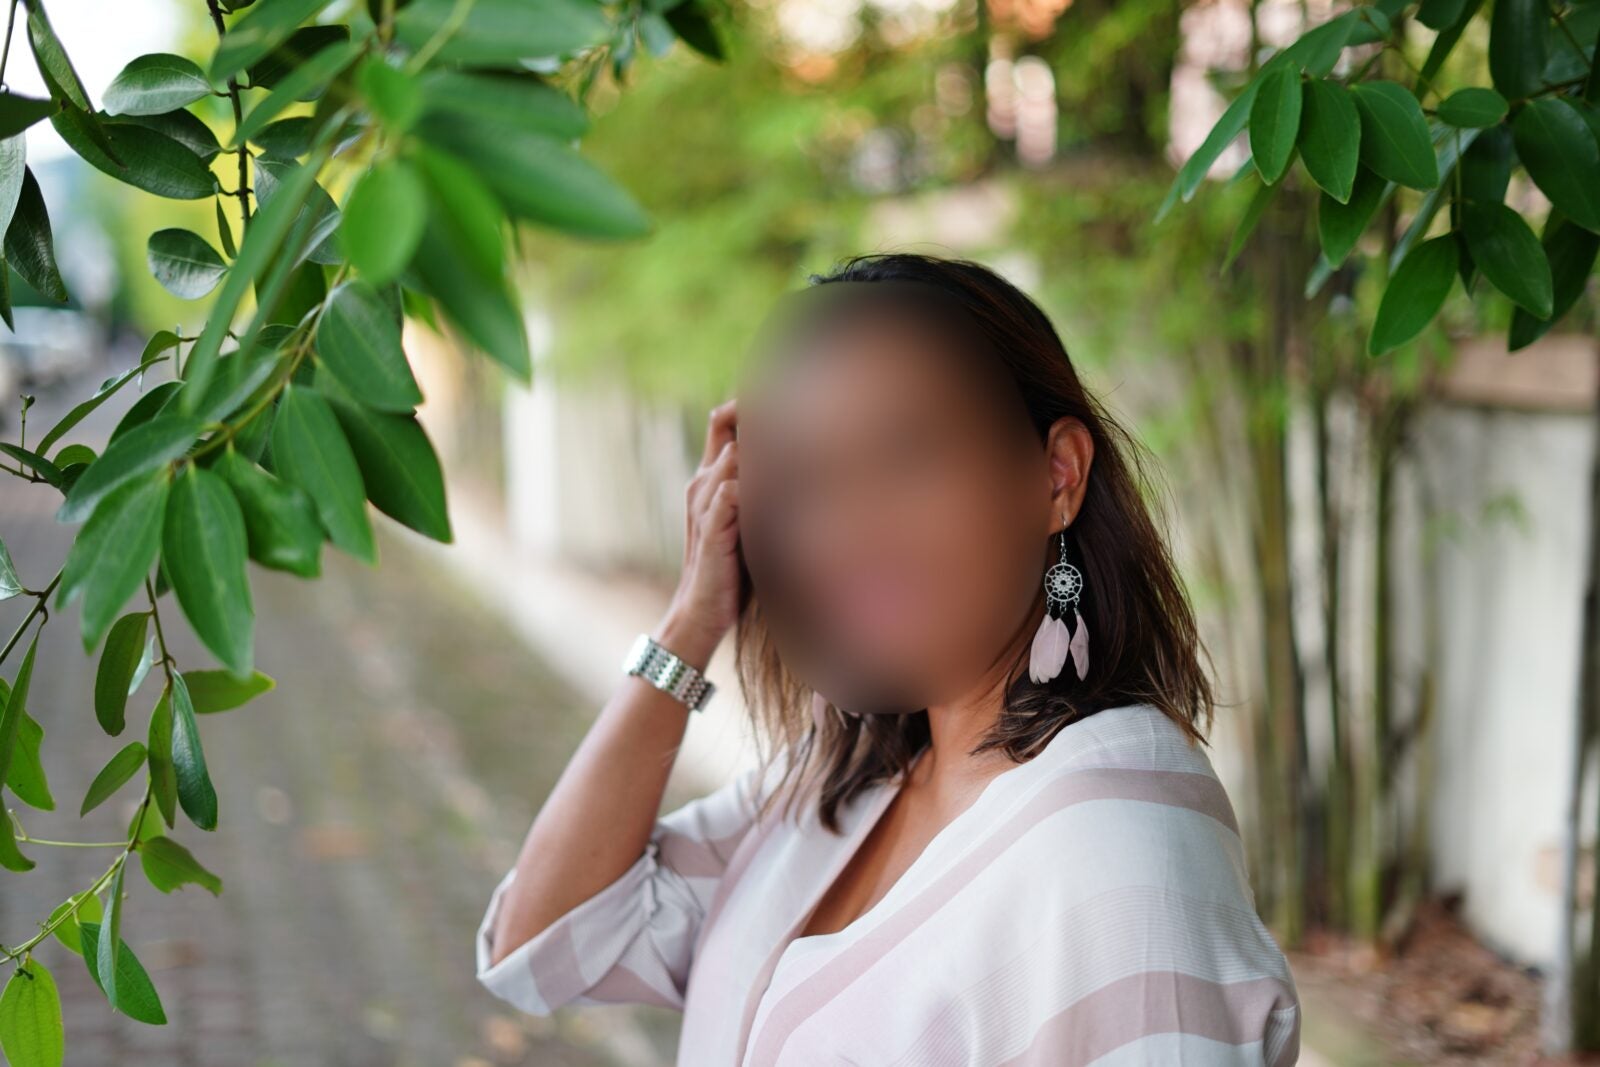 Woman in white blouse and dangling earrings standing under a tree on the sidewalk of a street.